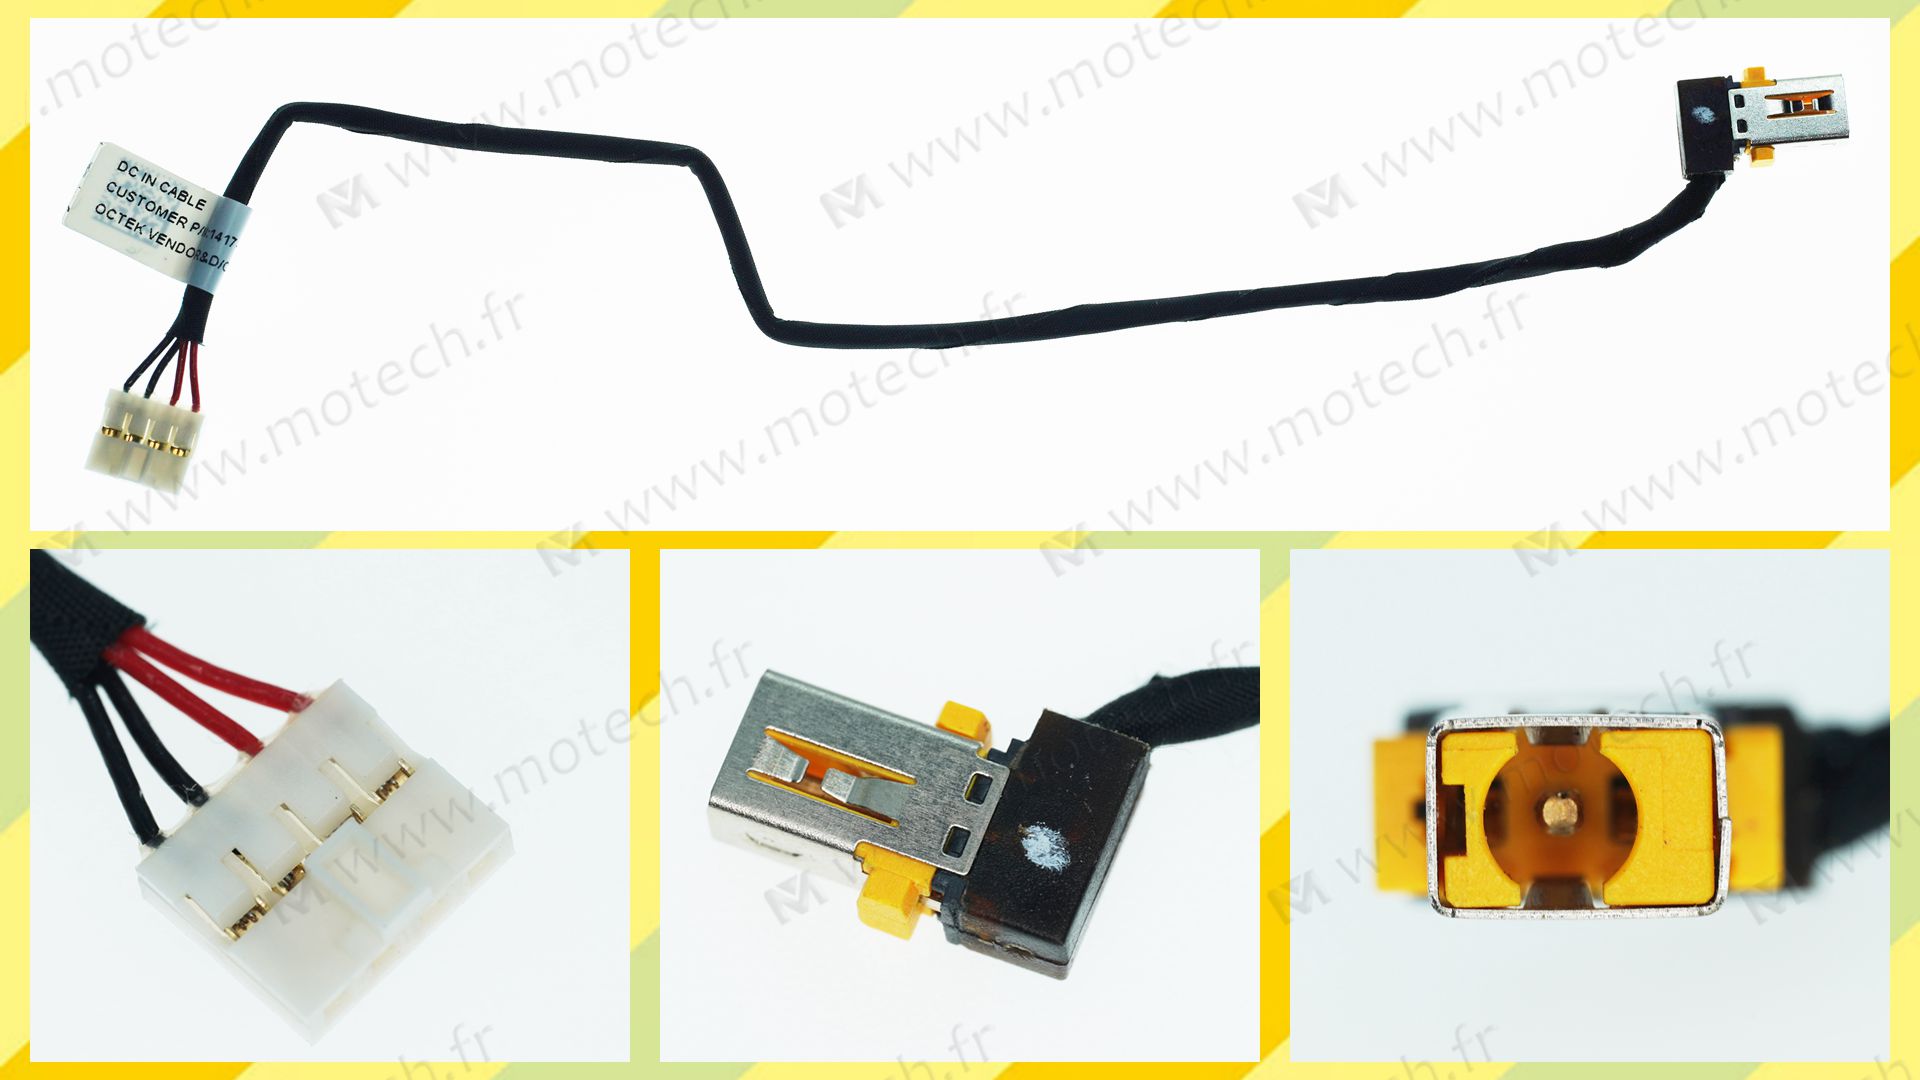 Acer TMP214-51 charging connector, Acer TMP214-51 DC Power Jack, Acer TMP214-51 DC IN Cable, Acer TMP214-51 Power Jack, Acer TMP214-51 plug, Acer TMP214-51 Jack socket, Acer TMP214-51 connecteur de charge, 